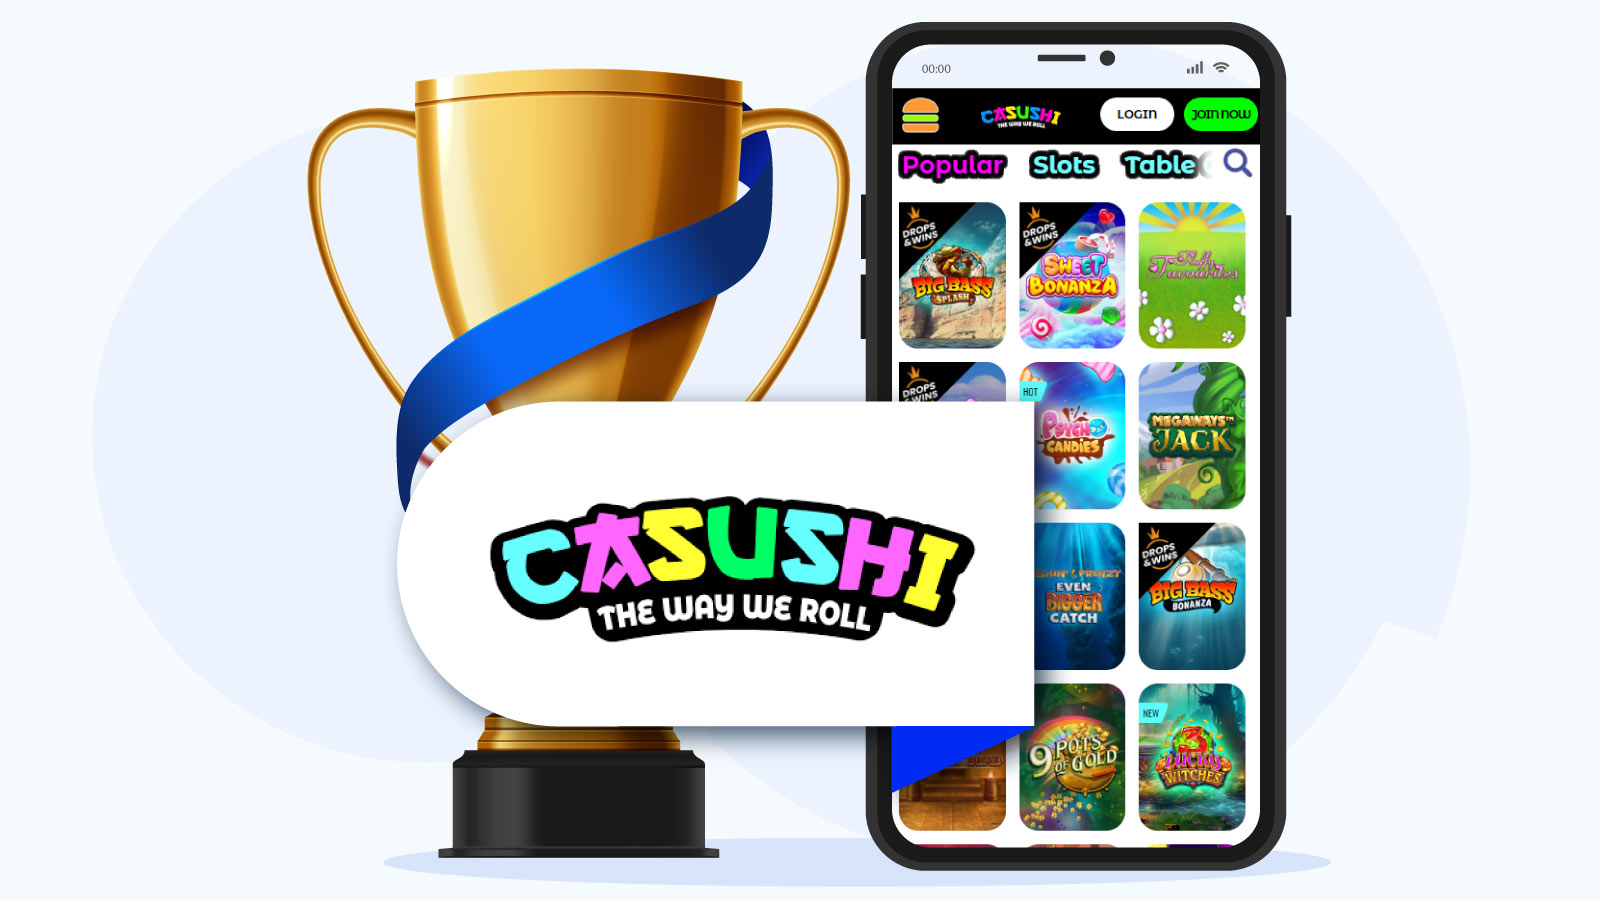 Casushi Casino – Our Top Android Casino Recommendation